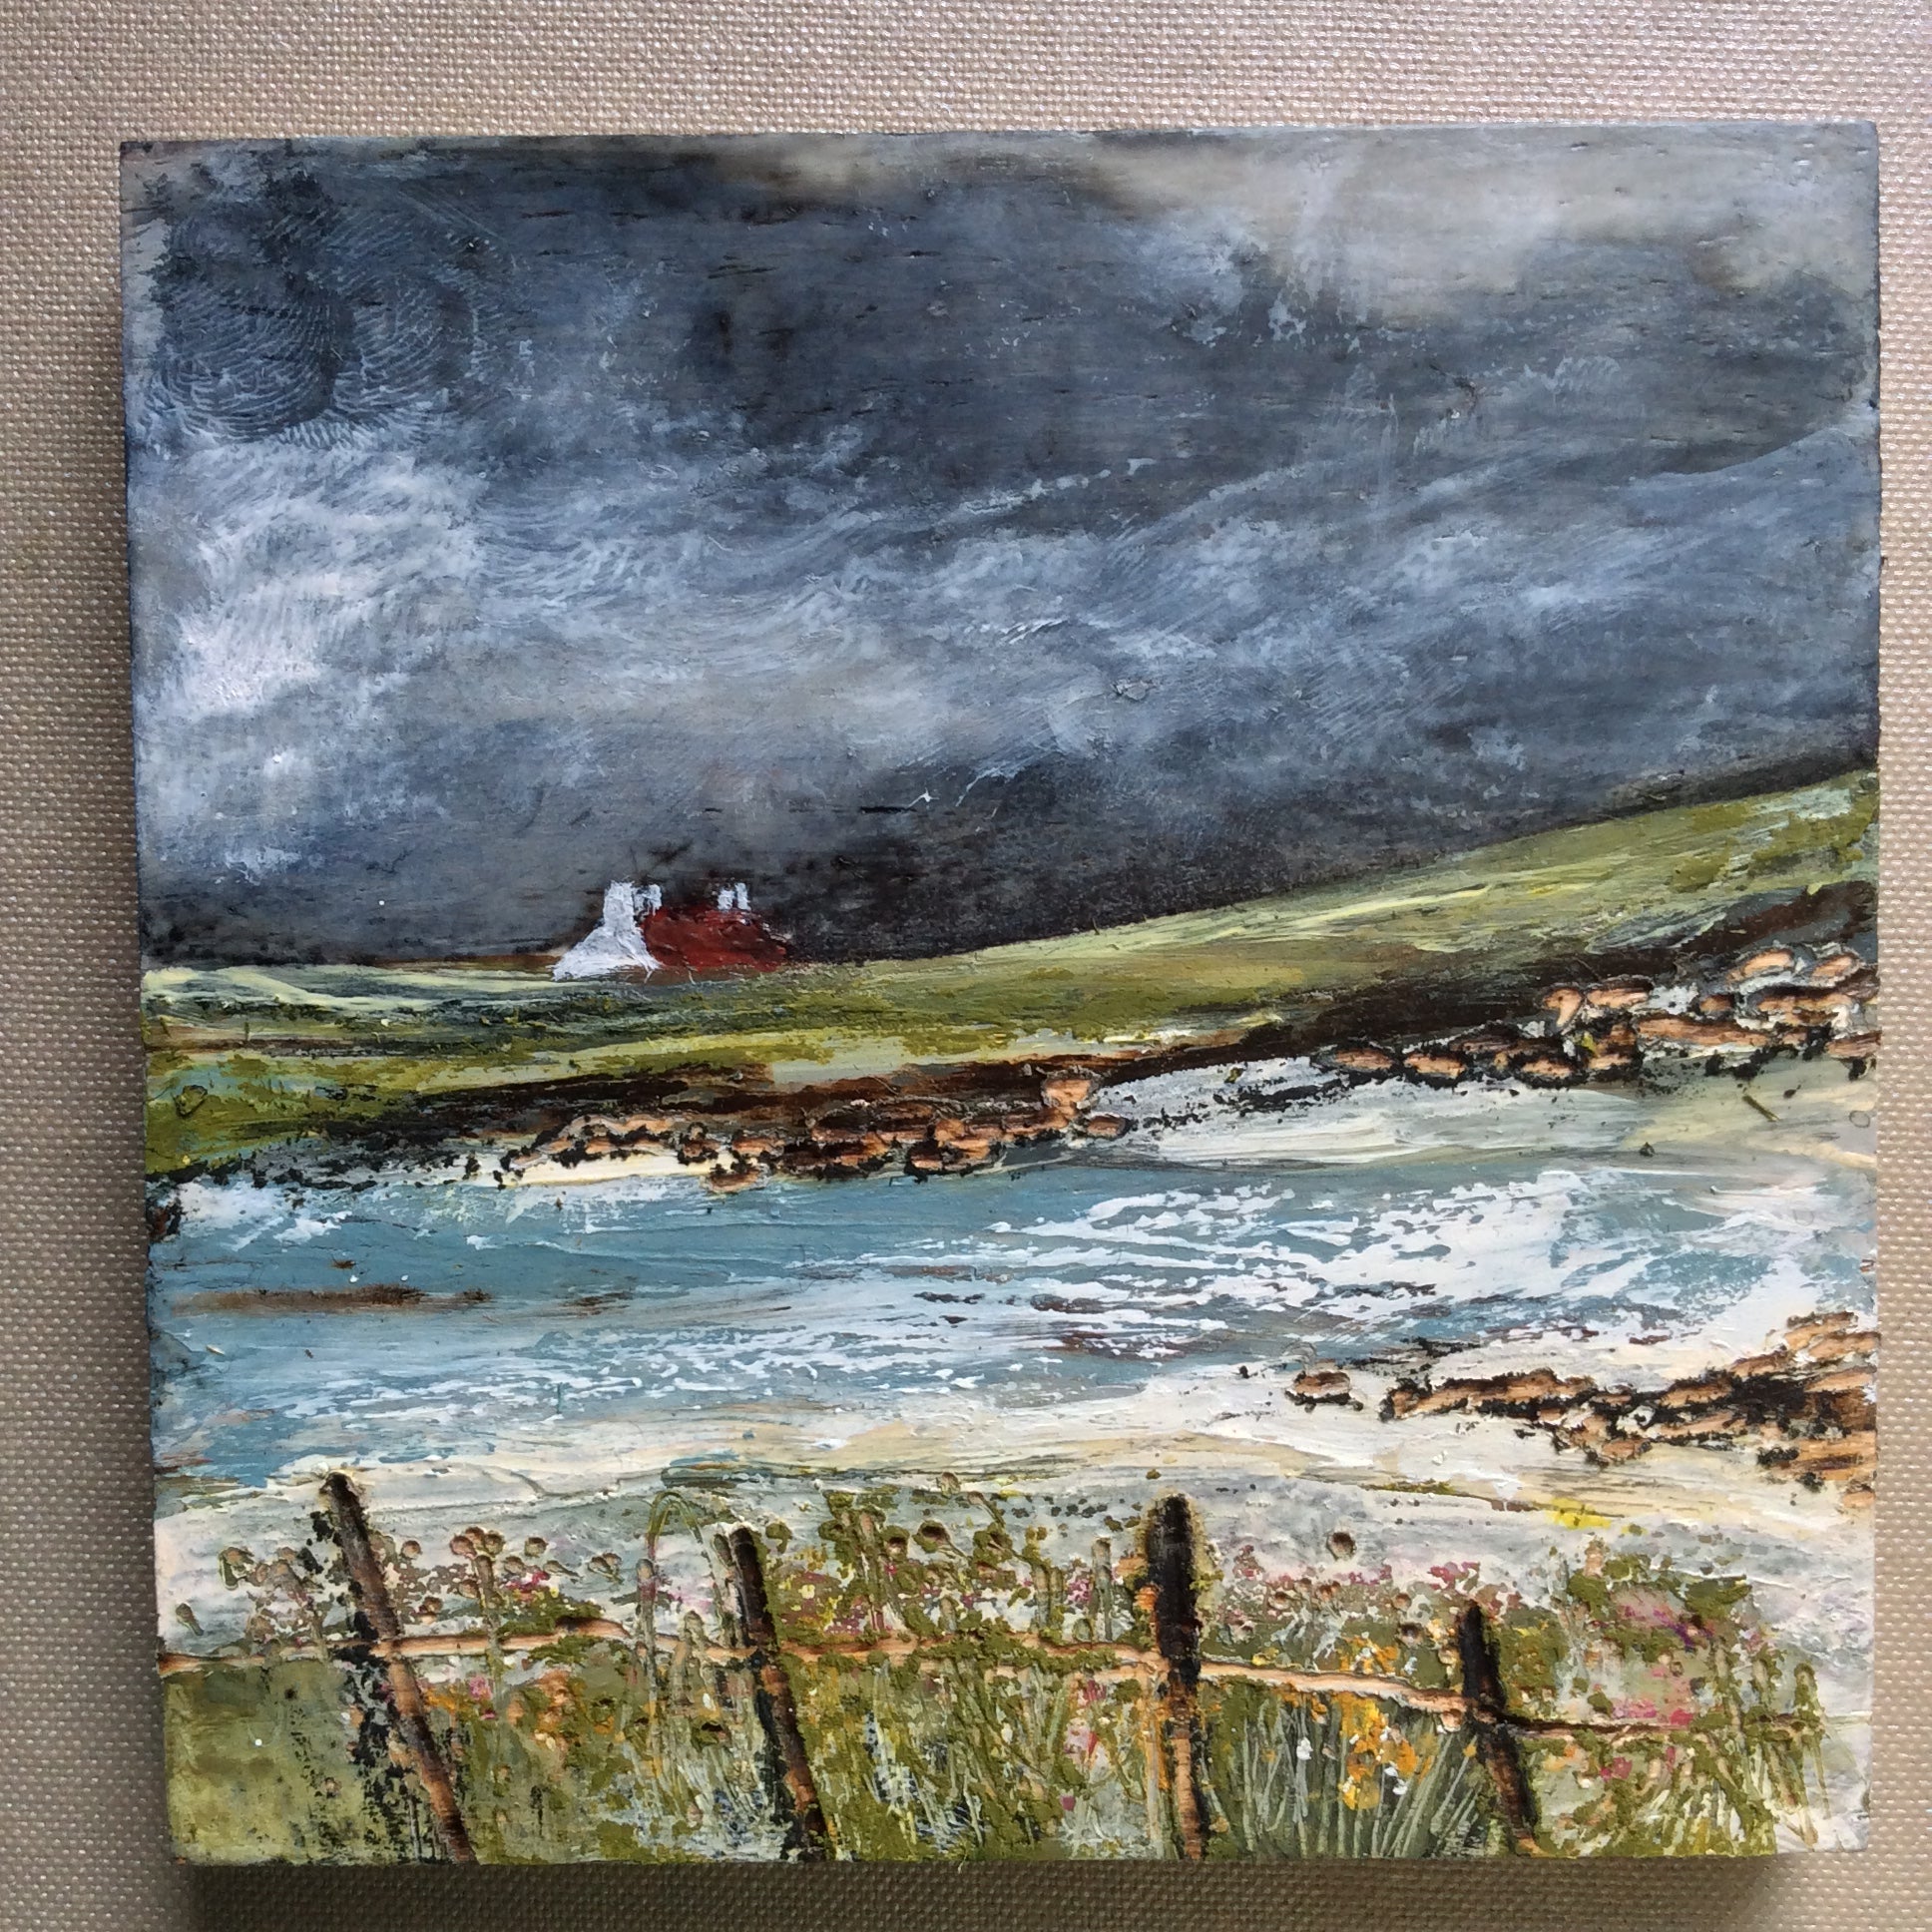 Mixed Media Art on wood By Louise O'Hara - "An evening storm”